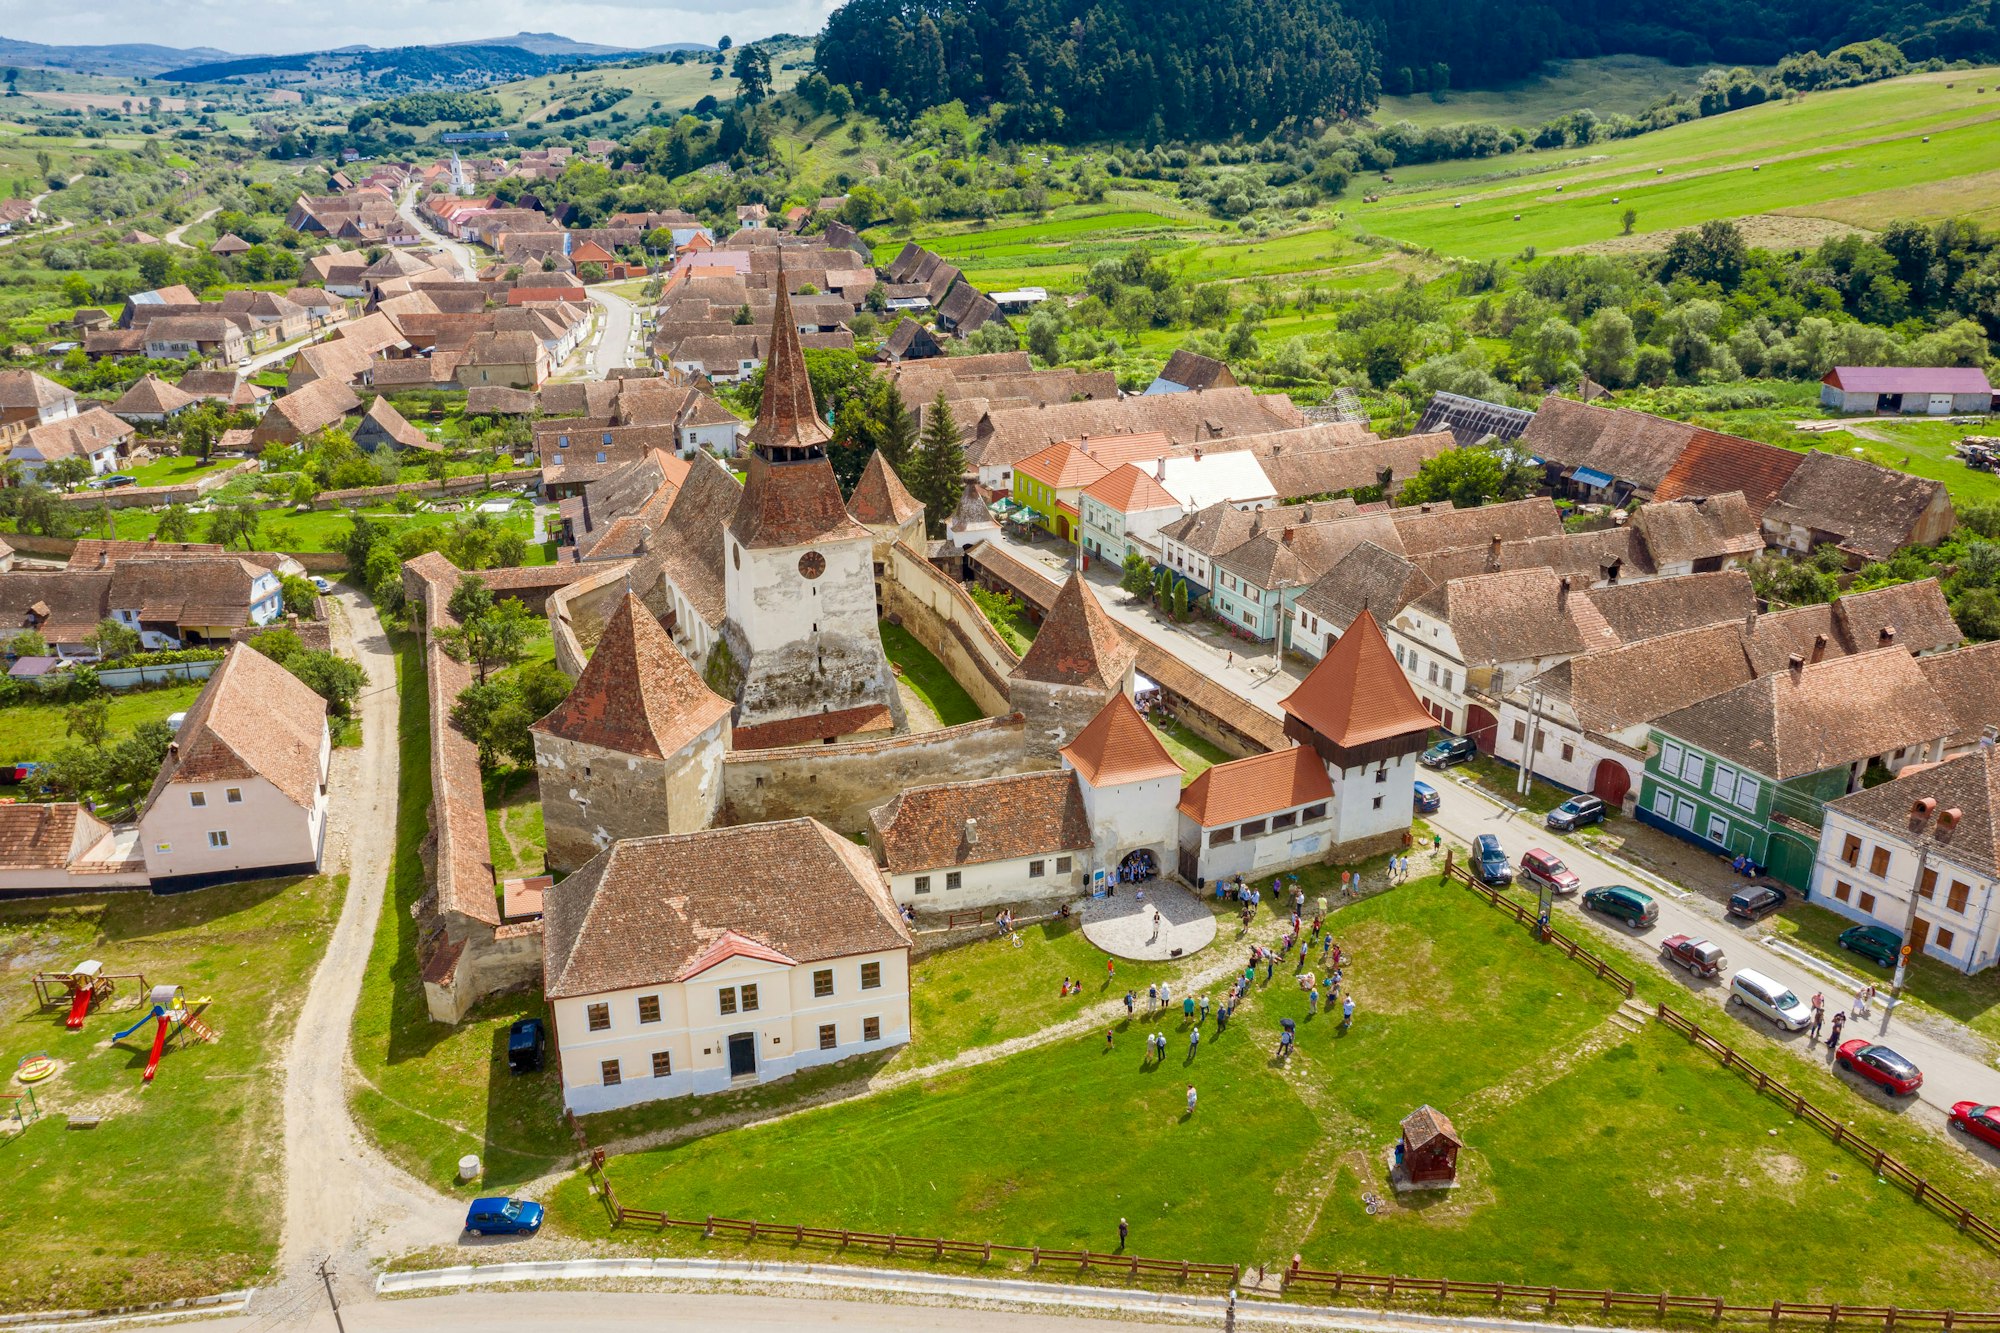 Archita fortified saxon church as seen from above